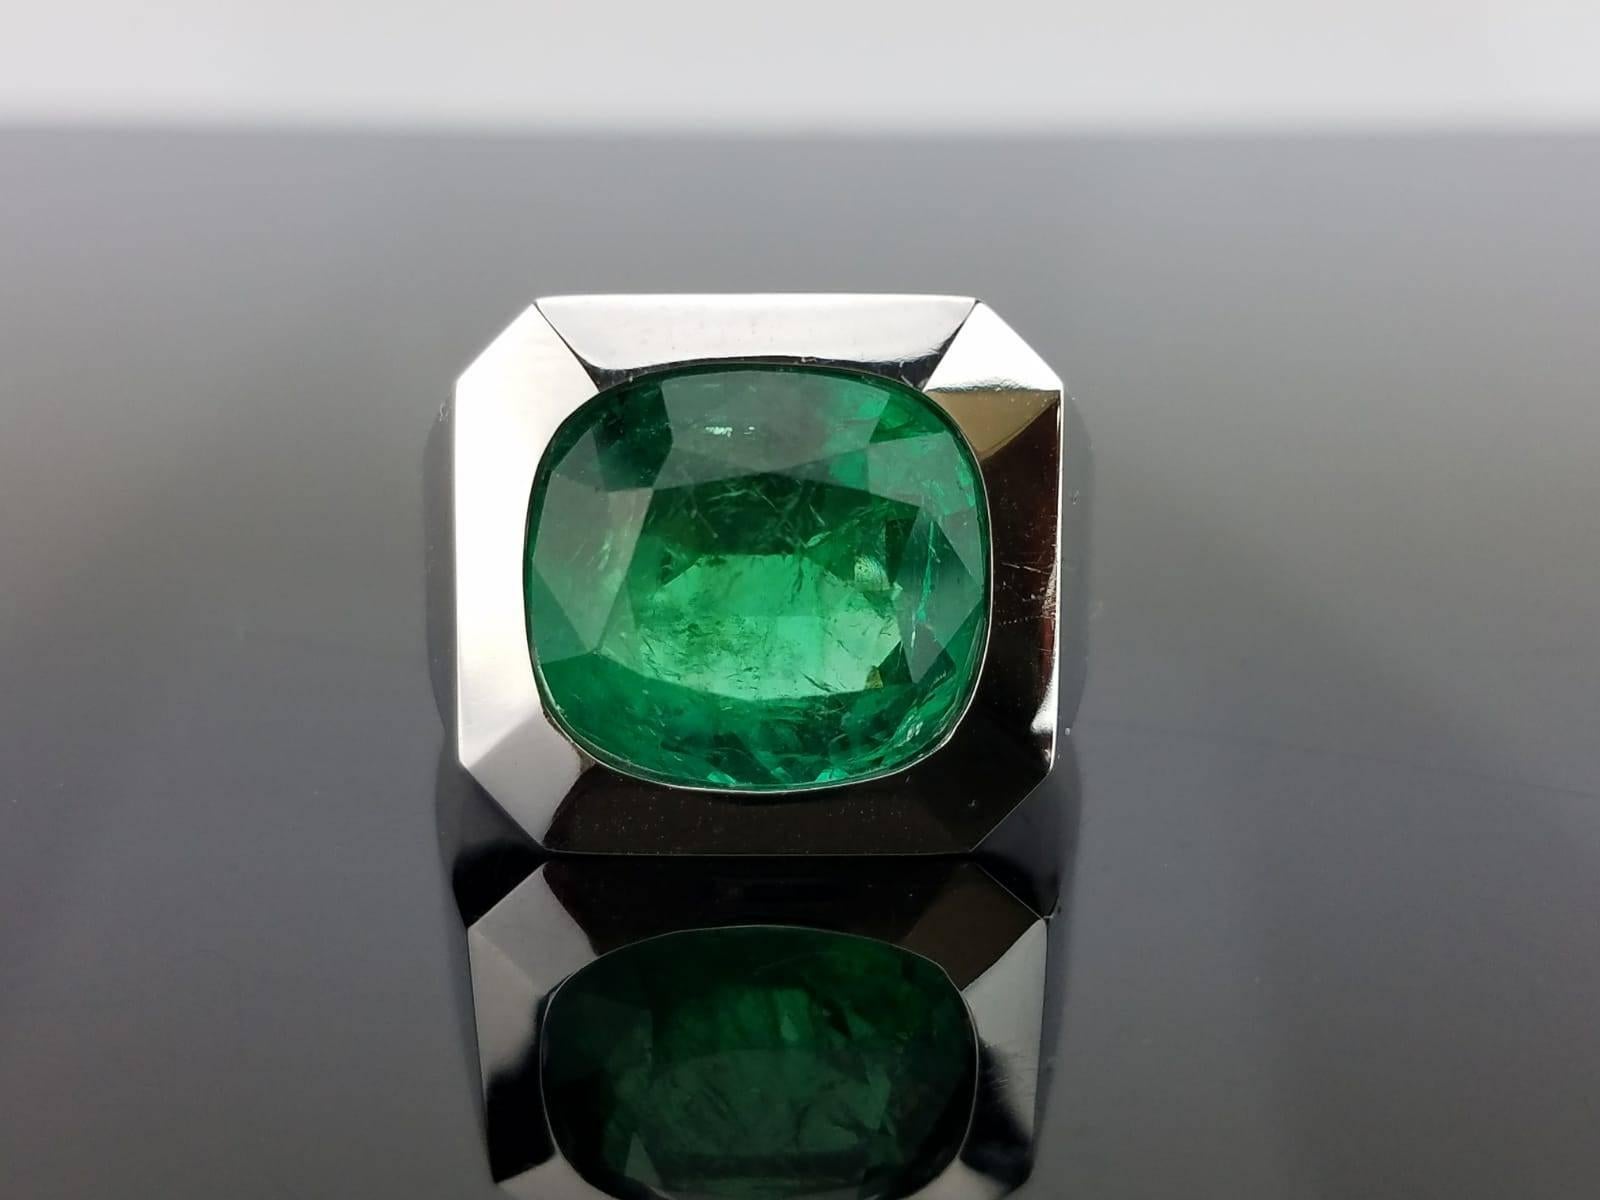 A simple Zambian Emerald set in 18 K white gold band, making it a classic looking men's ring.  

Stone Details:  
Stone: Zambian Emerald 
Carat Weight: 10.67 Carats  

18K Gold:  11.92 grams   

Currently a ring size US 8, but we can resize the ring